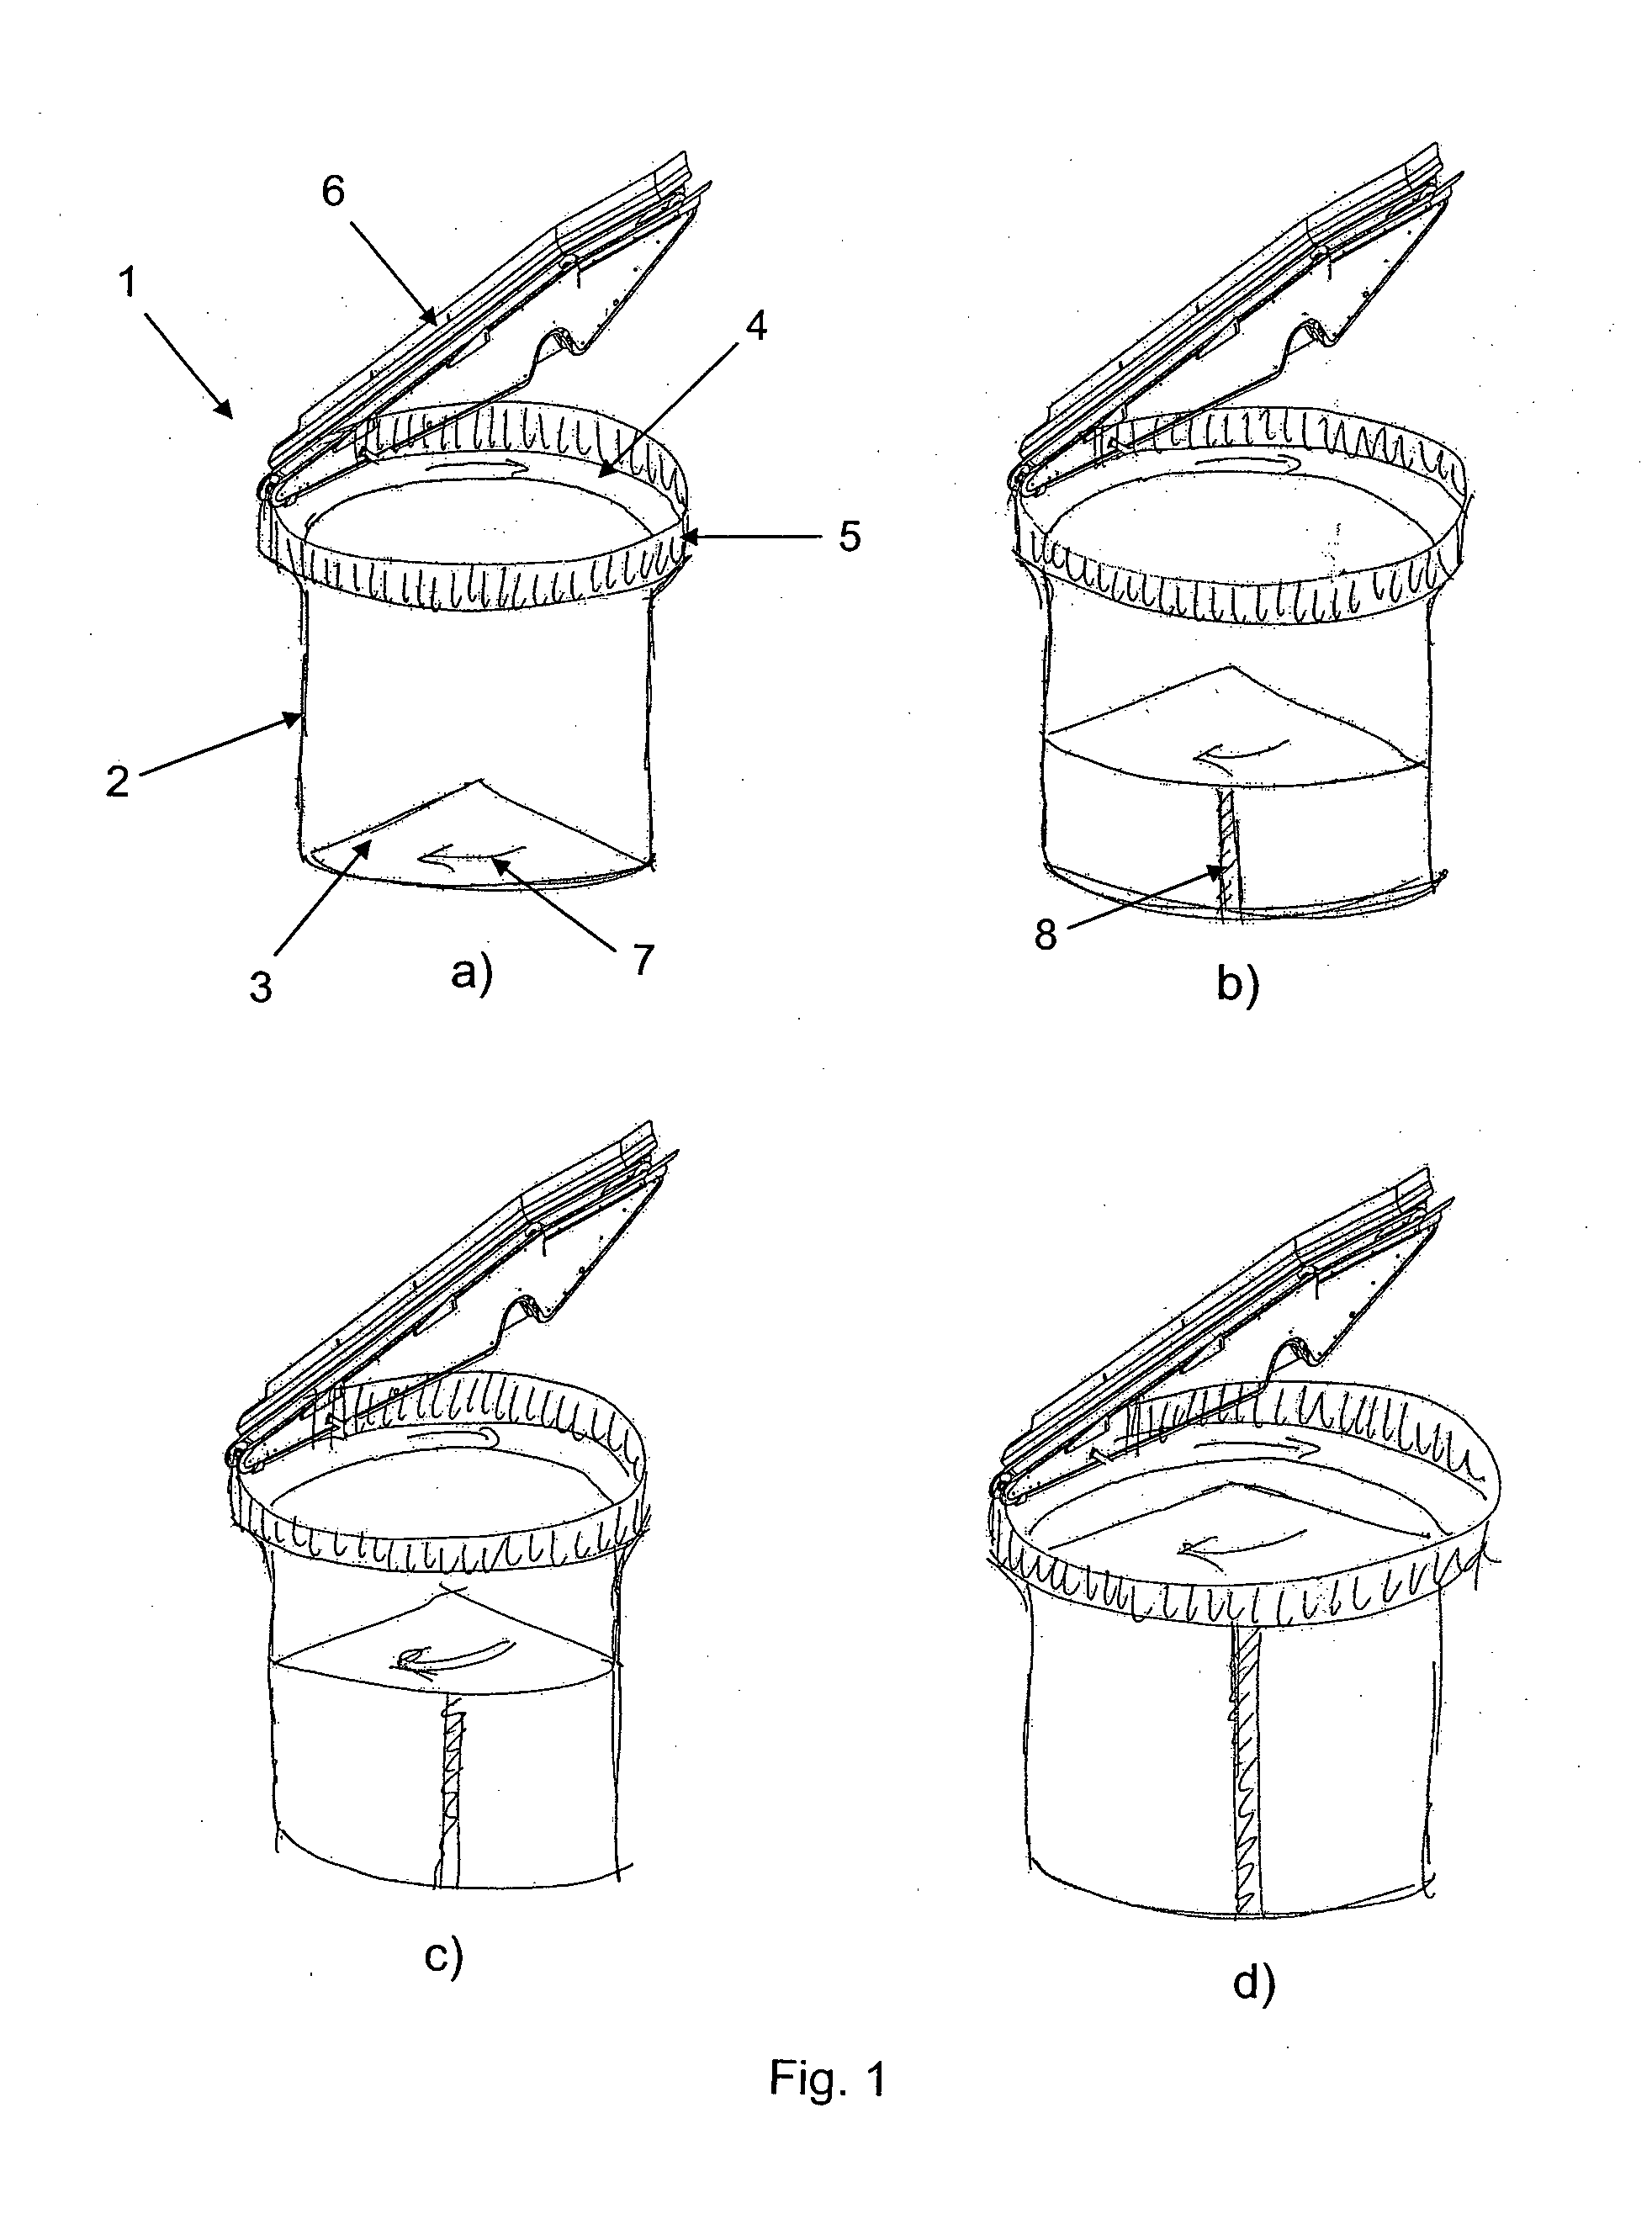 System and Method for Receiving and Feeding Used Beverage Containers (UBC) to at Least One Conveyor